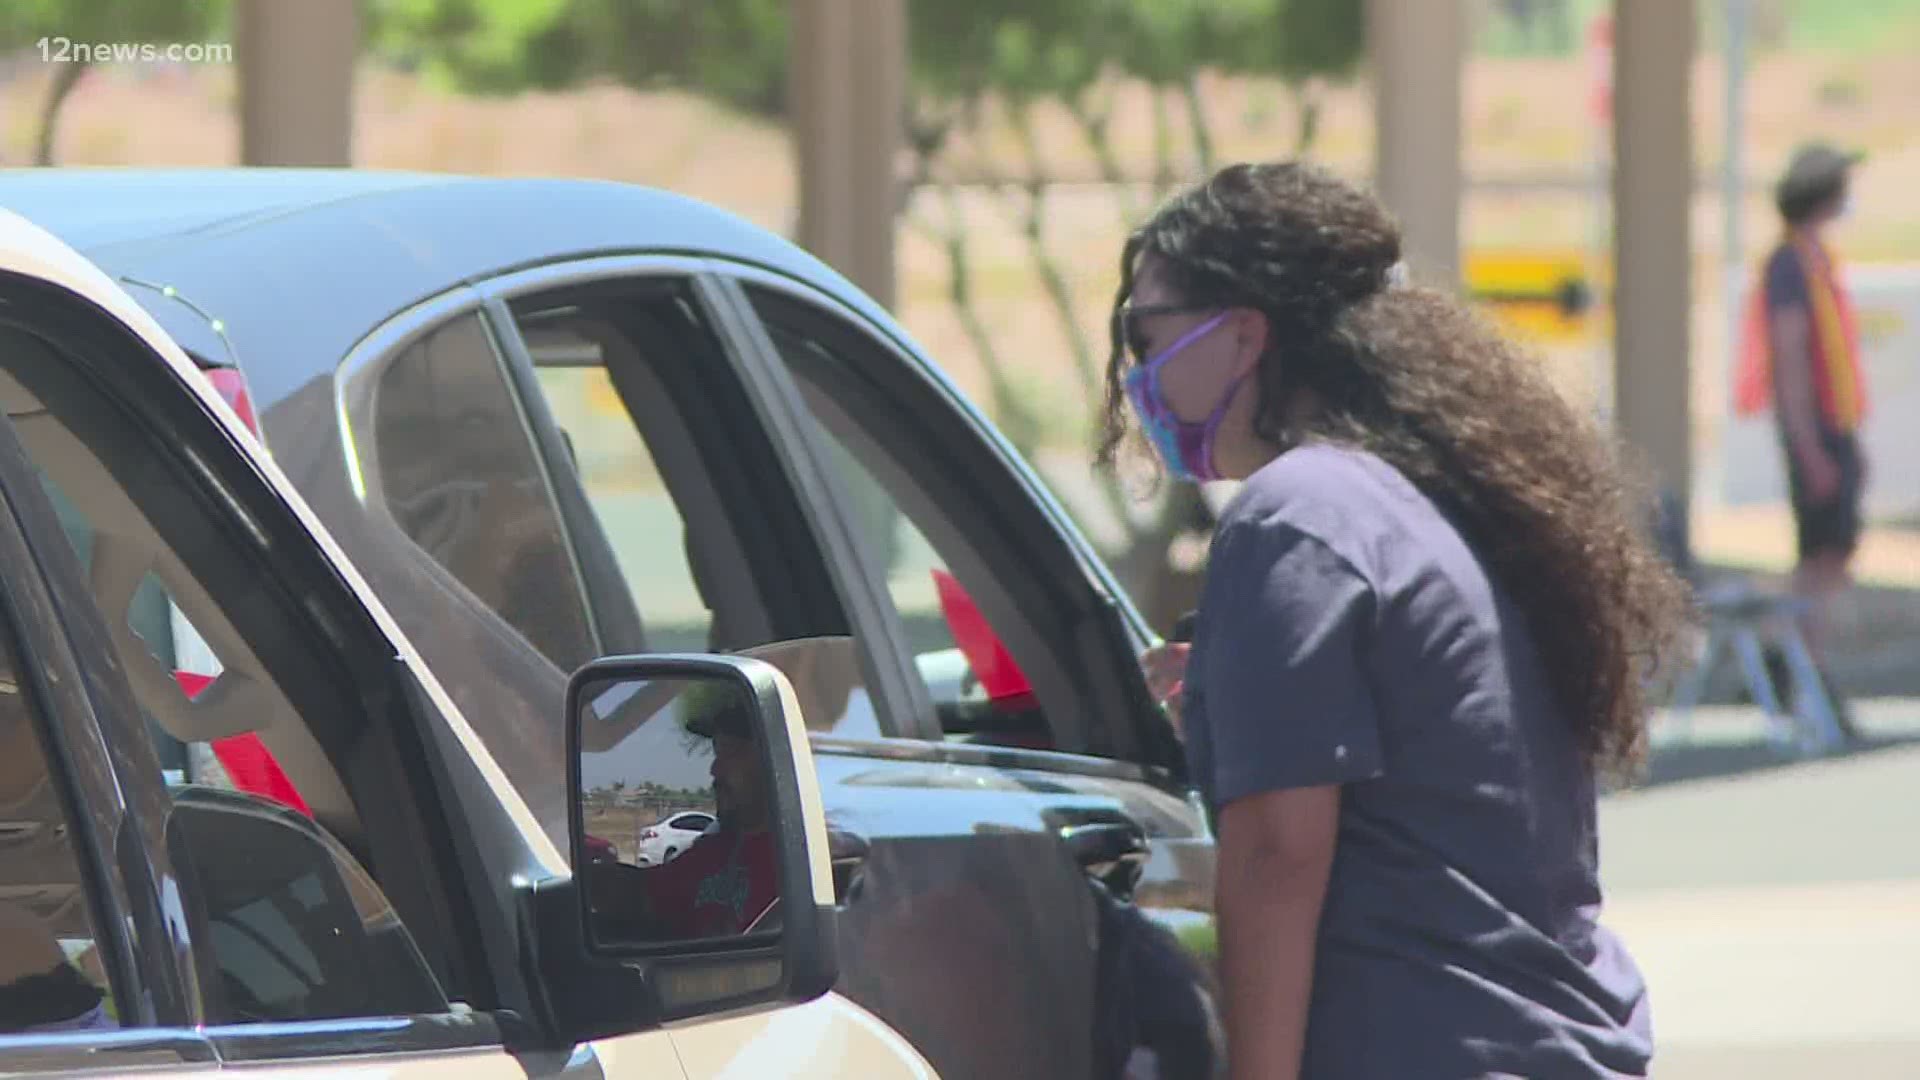 Laveen Elementary School held it's "Meet the Teacher Day". Due to COVID-19 teachers braved the heat and met with families at their cars in the parking lot.